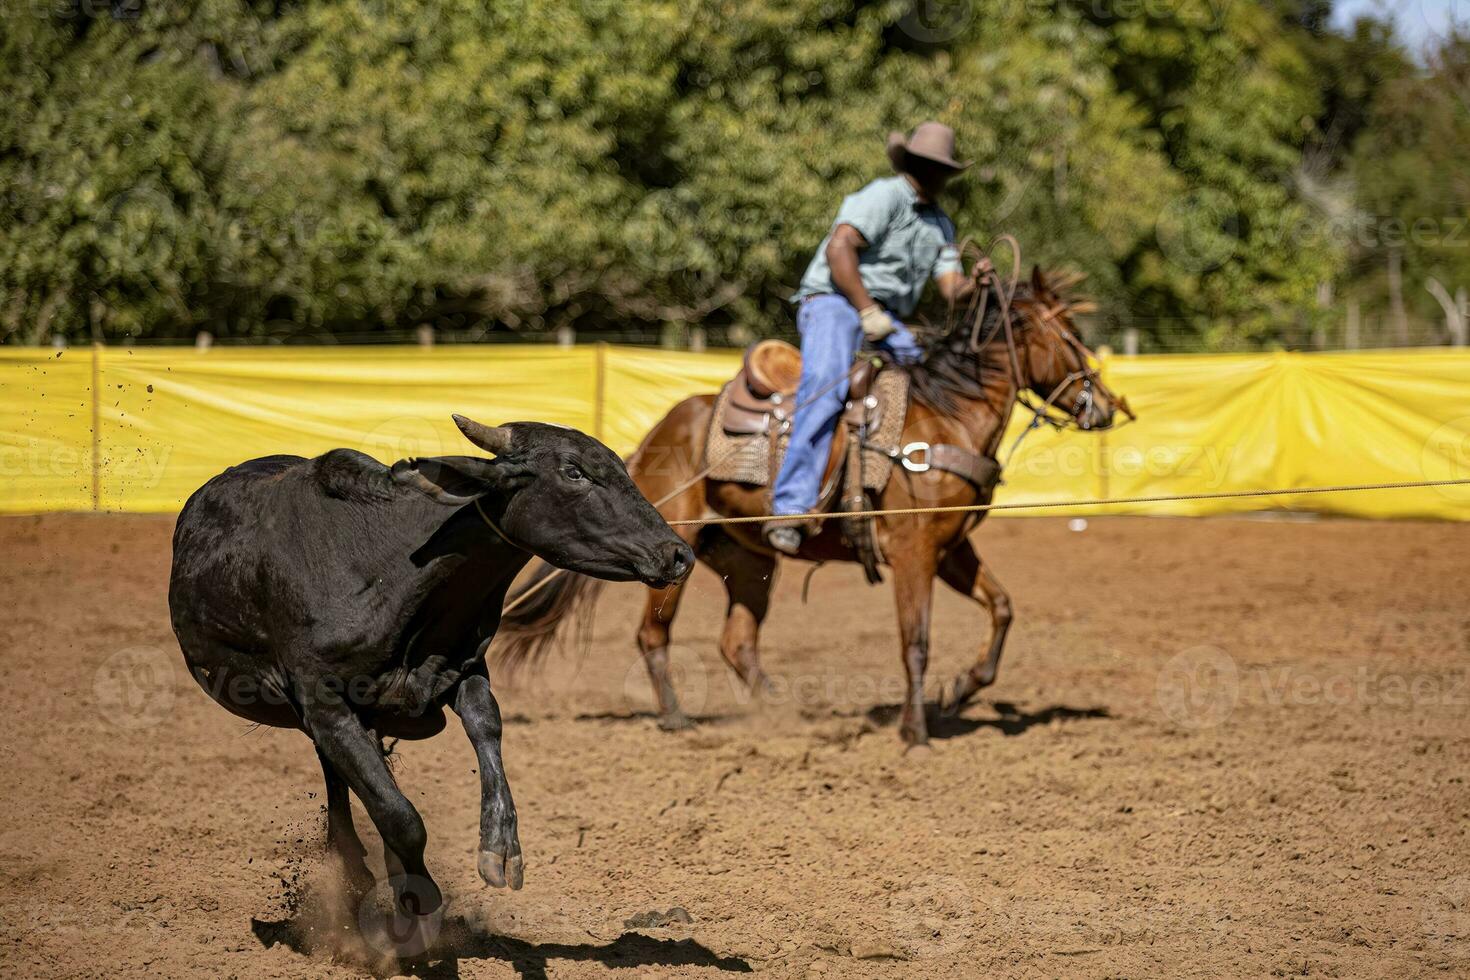 cow roping in equestrian sport of team roping photo